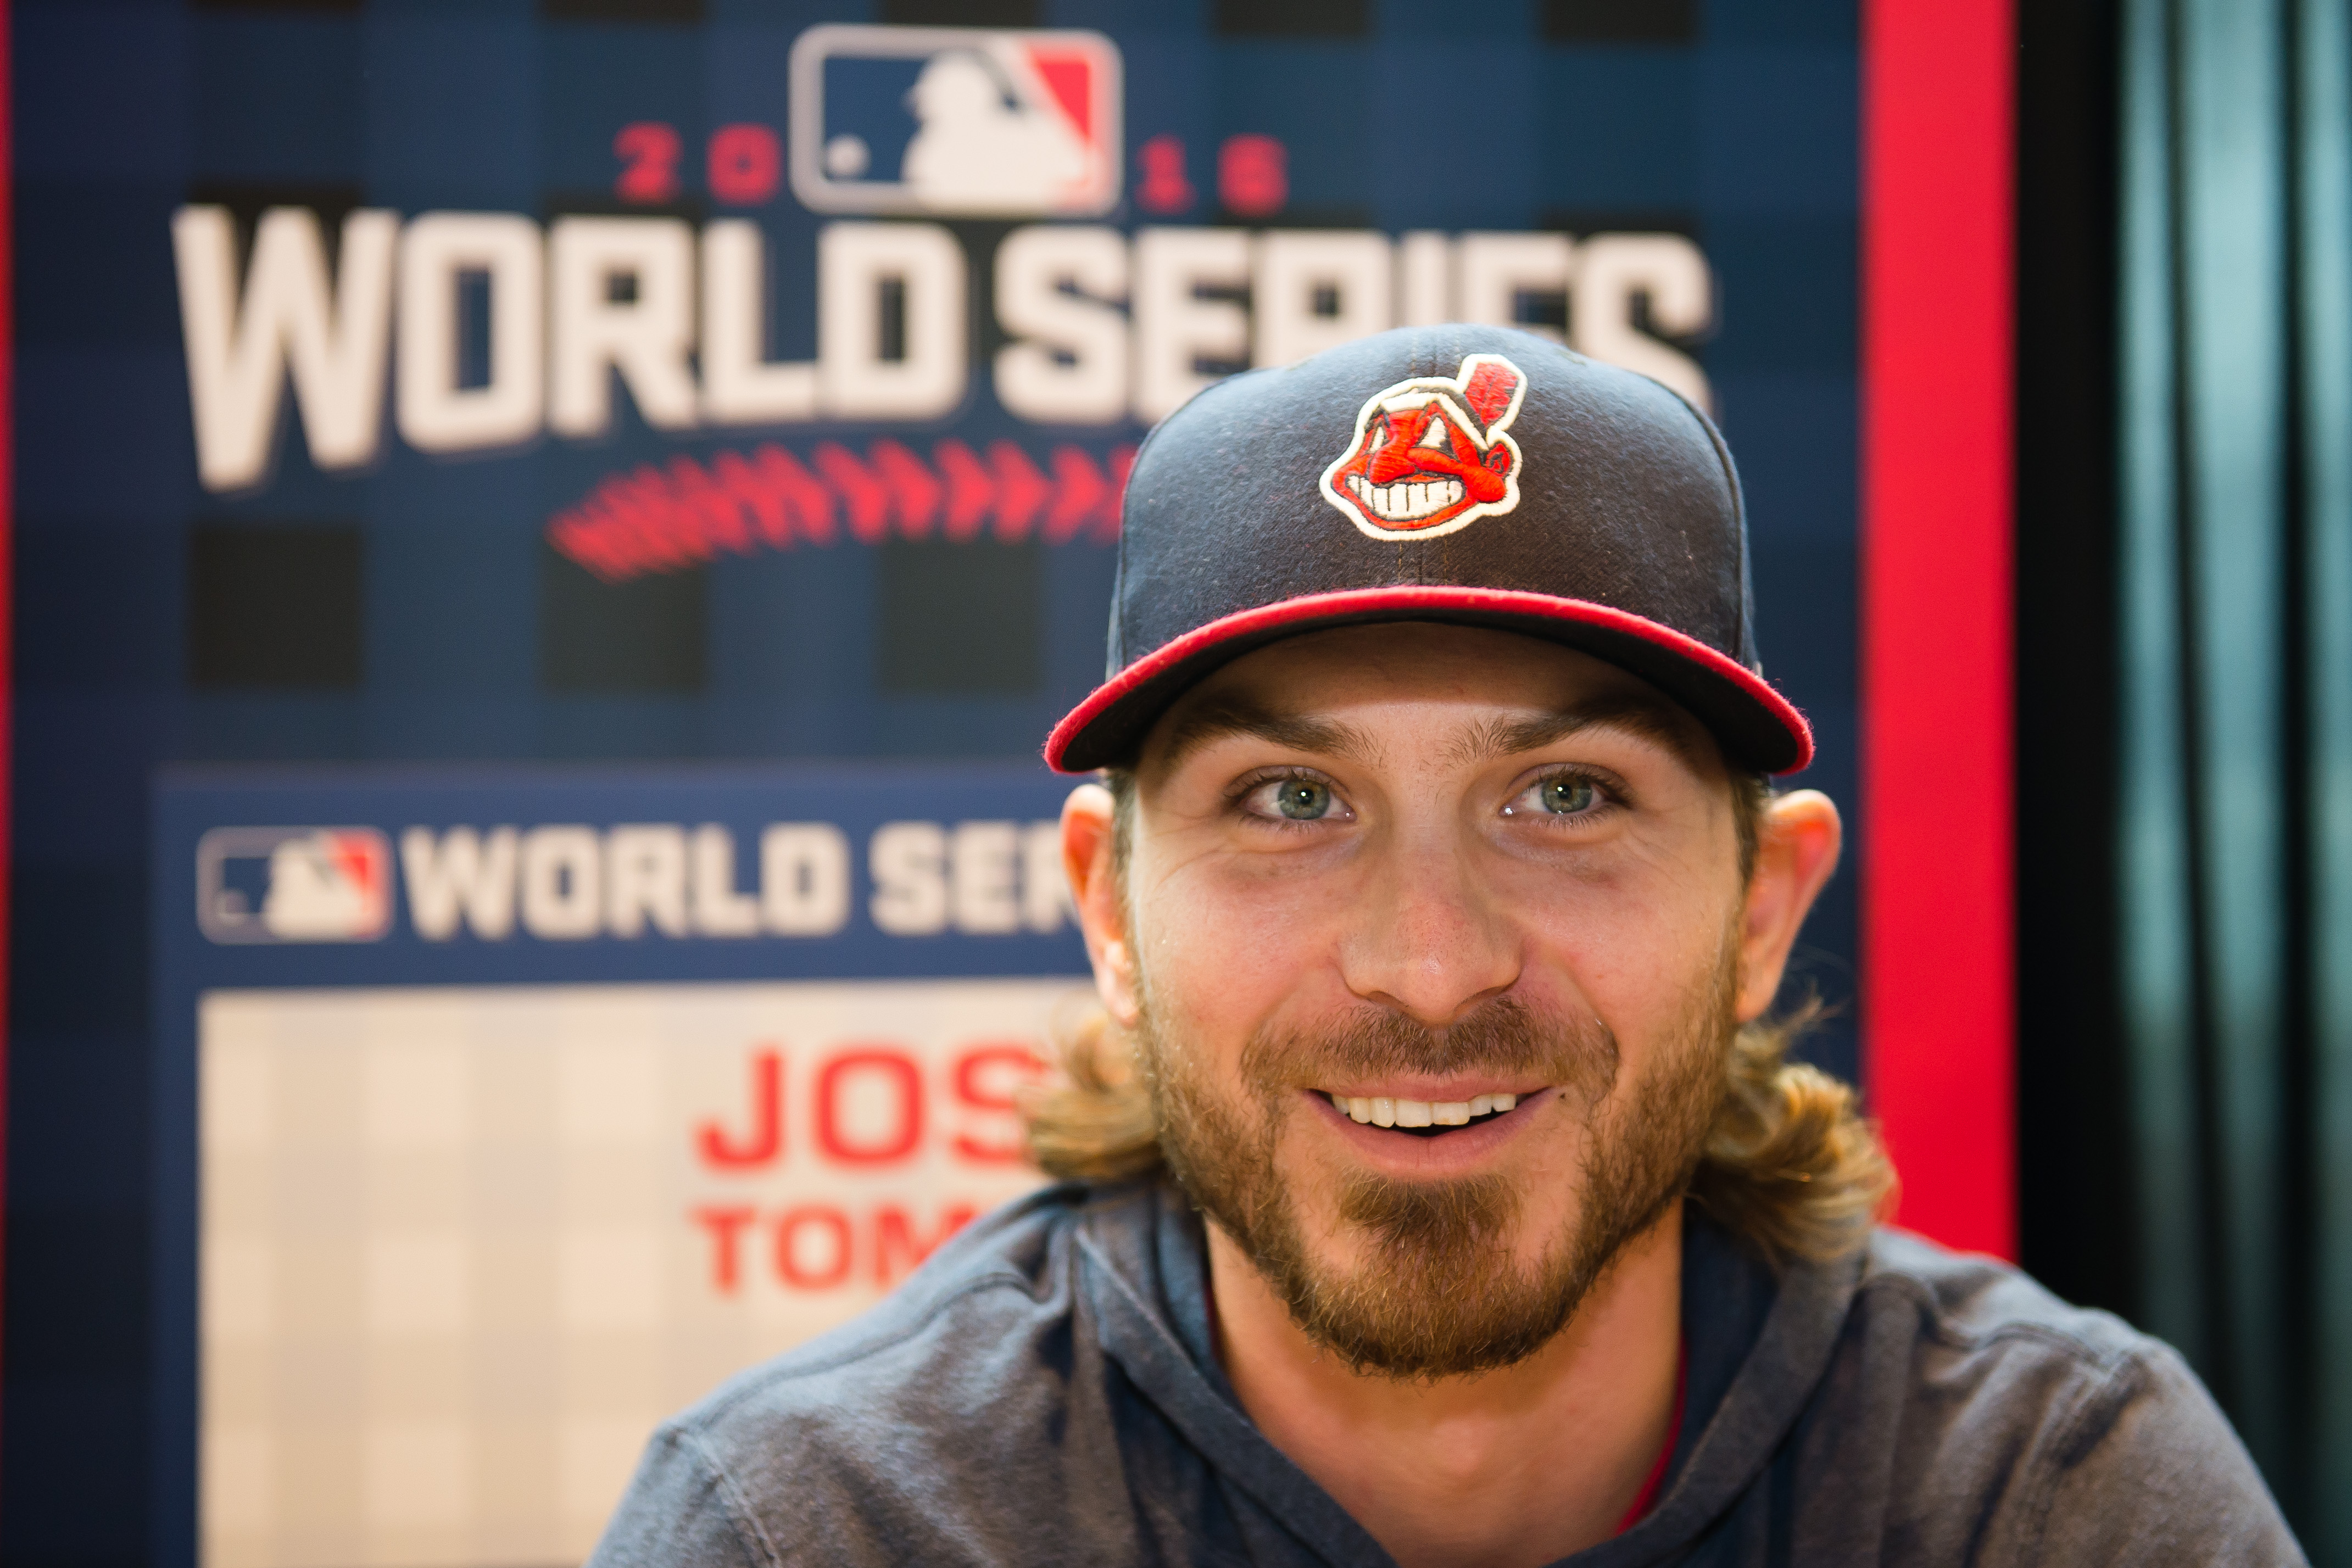 Cleveland Indians: Who has the best hair in baseball?